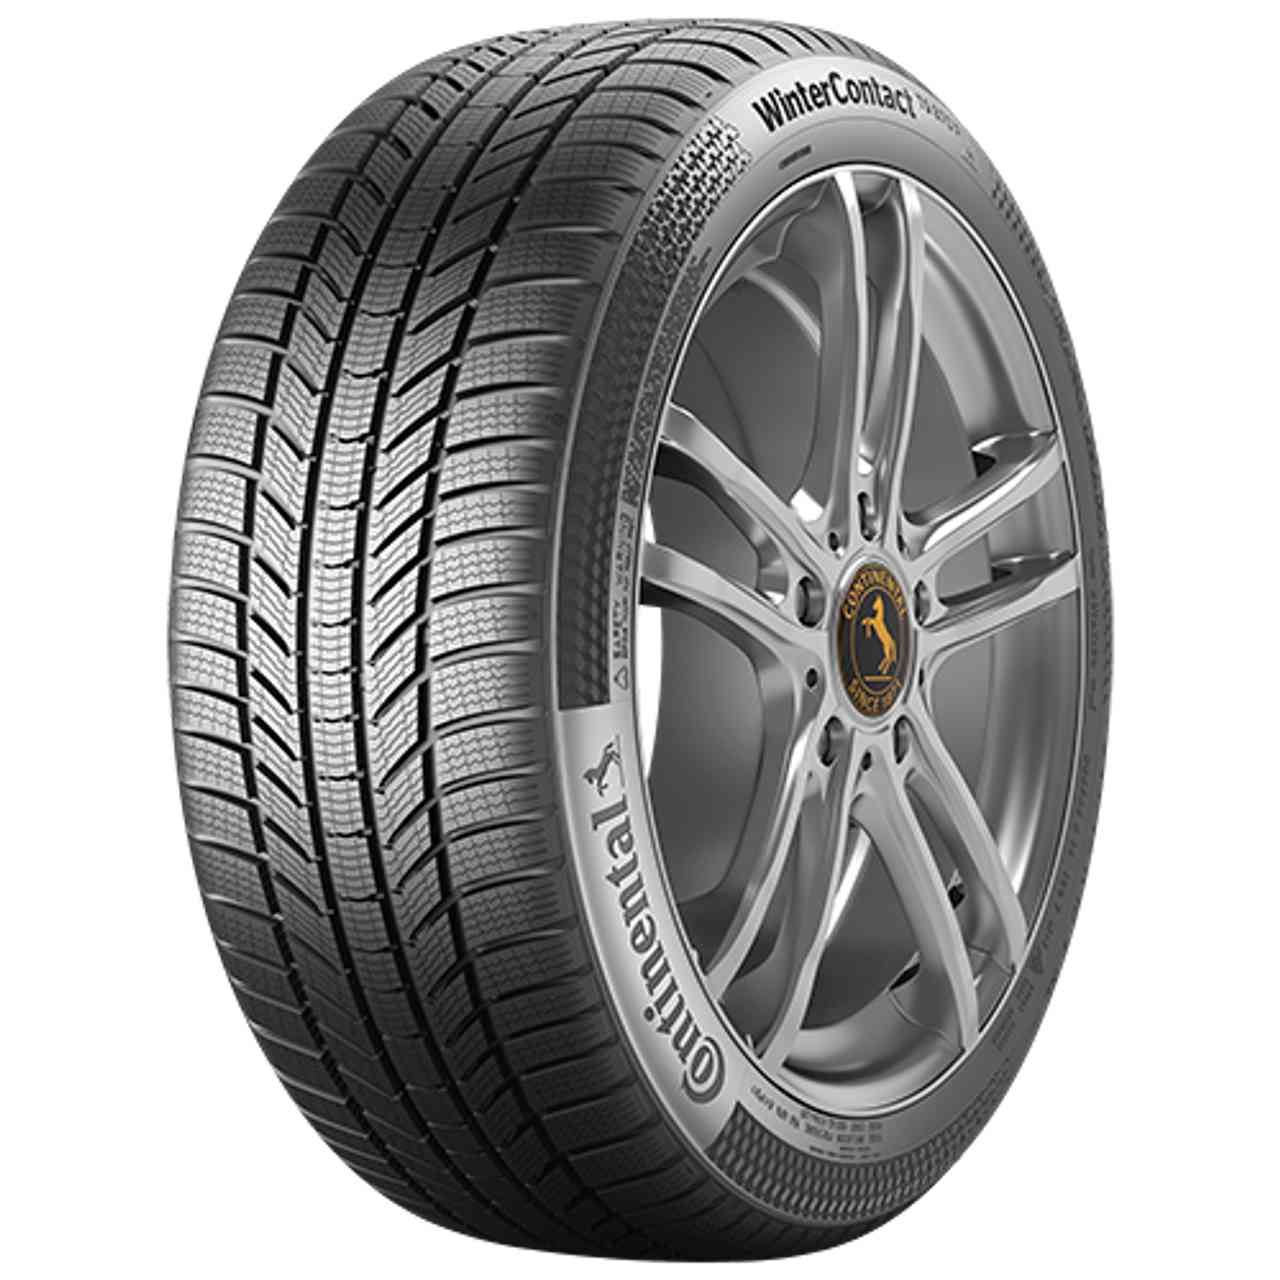 CONTINENTAL WINTERCONTACT TS 870 P (EVc) 235/60R17 106V FR BSW von Continental